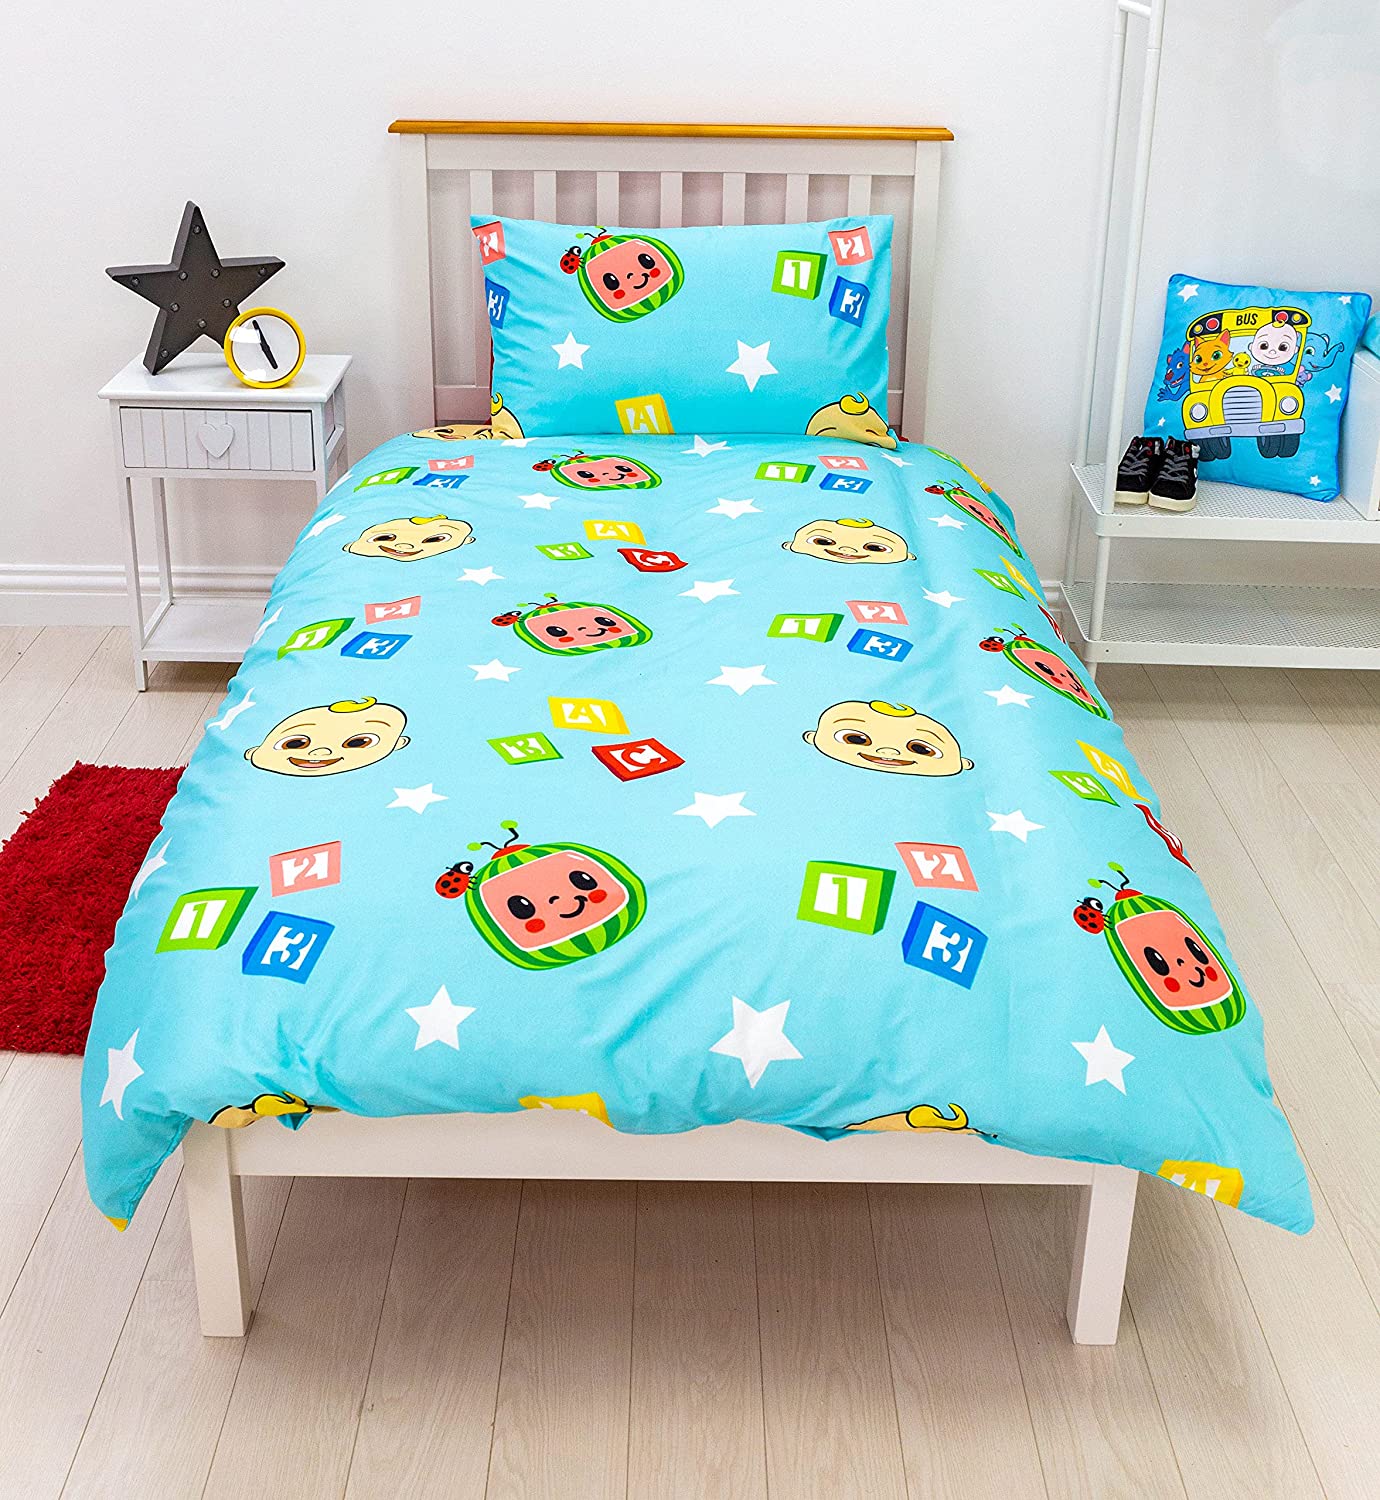 Single Bed Cocomelon Official Duvet Cover Set Reversible 2 Sided Character Bedding